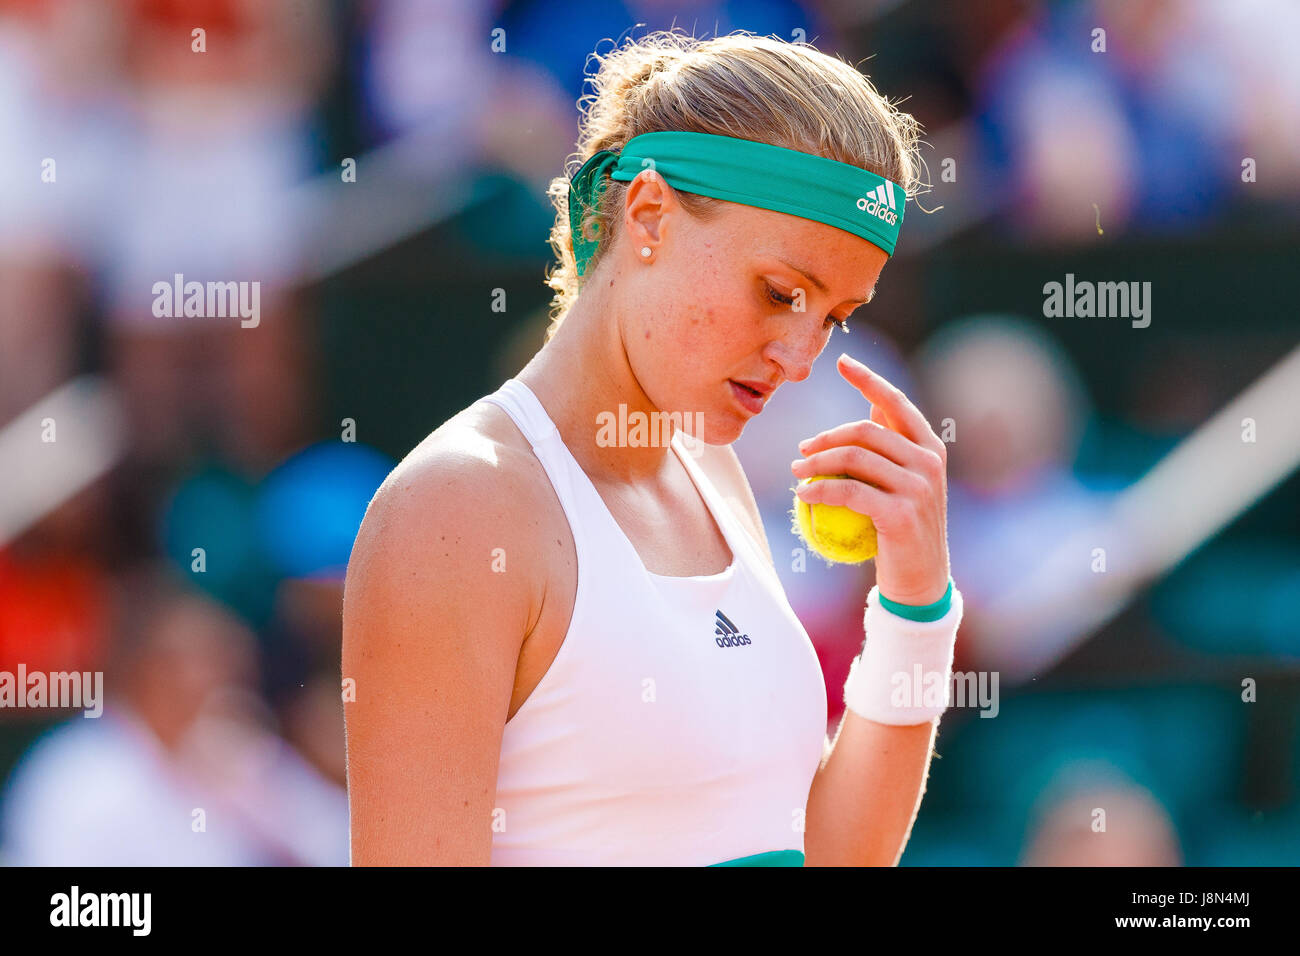 Paris, France, 29th May 2017, Tennis French Open: French player Kiki Mladenovic during her first round match at the 2017 Tennis French Open in Roland Garros Paris. Credit: Frank Molter/Alamy Live News Stock Photo